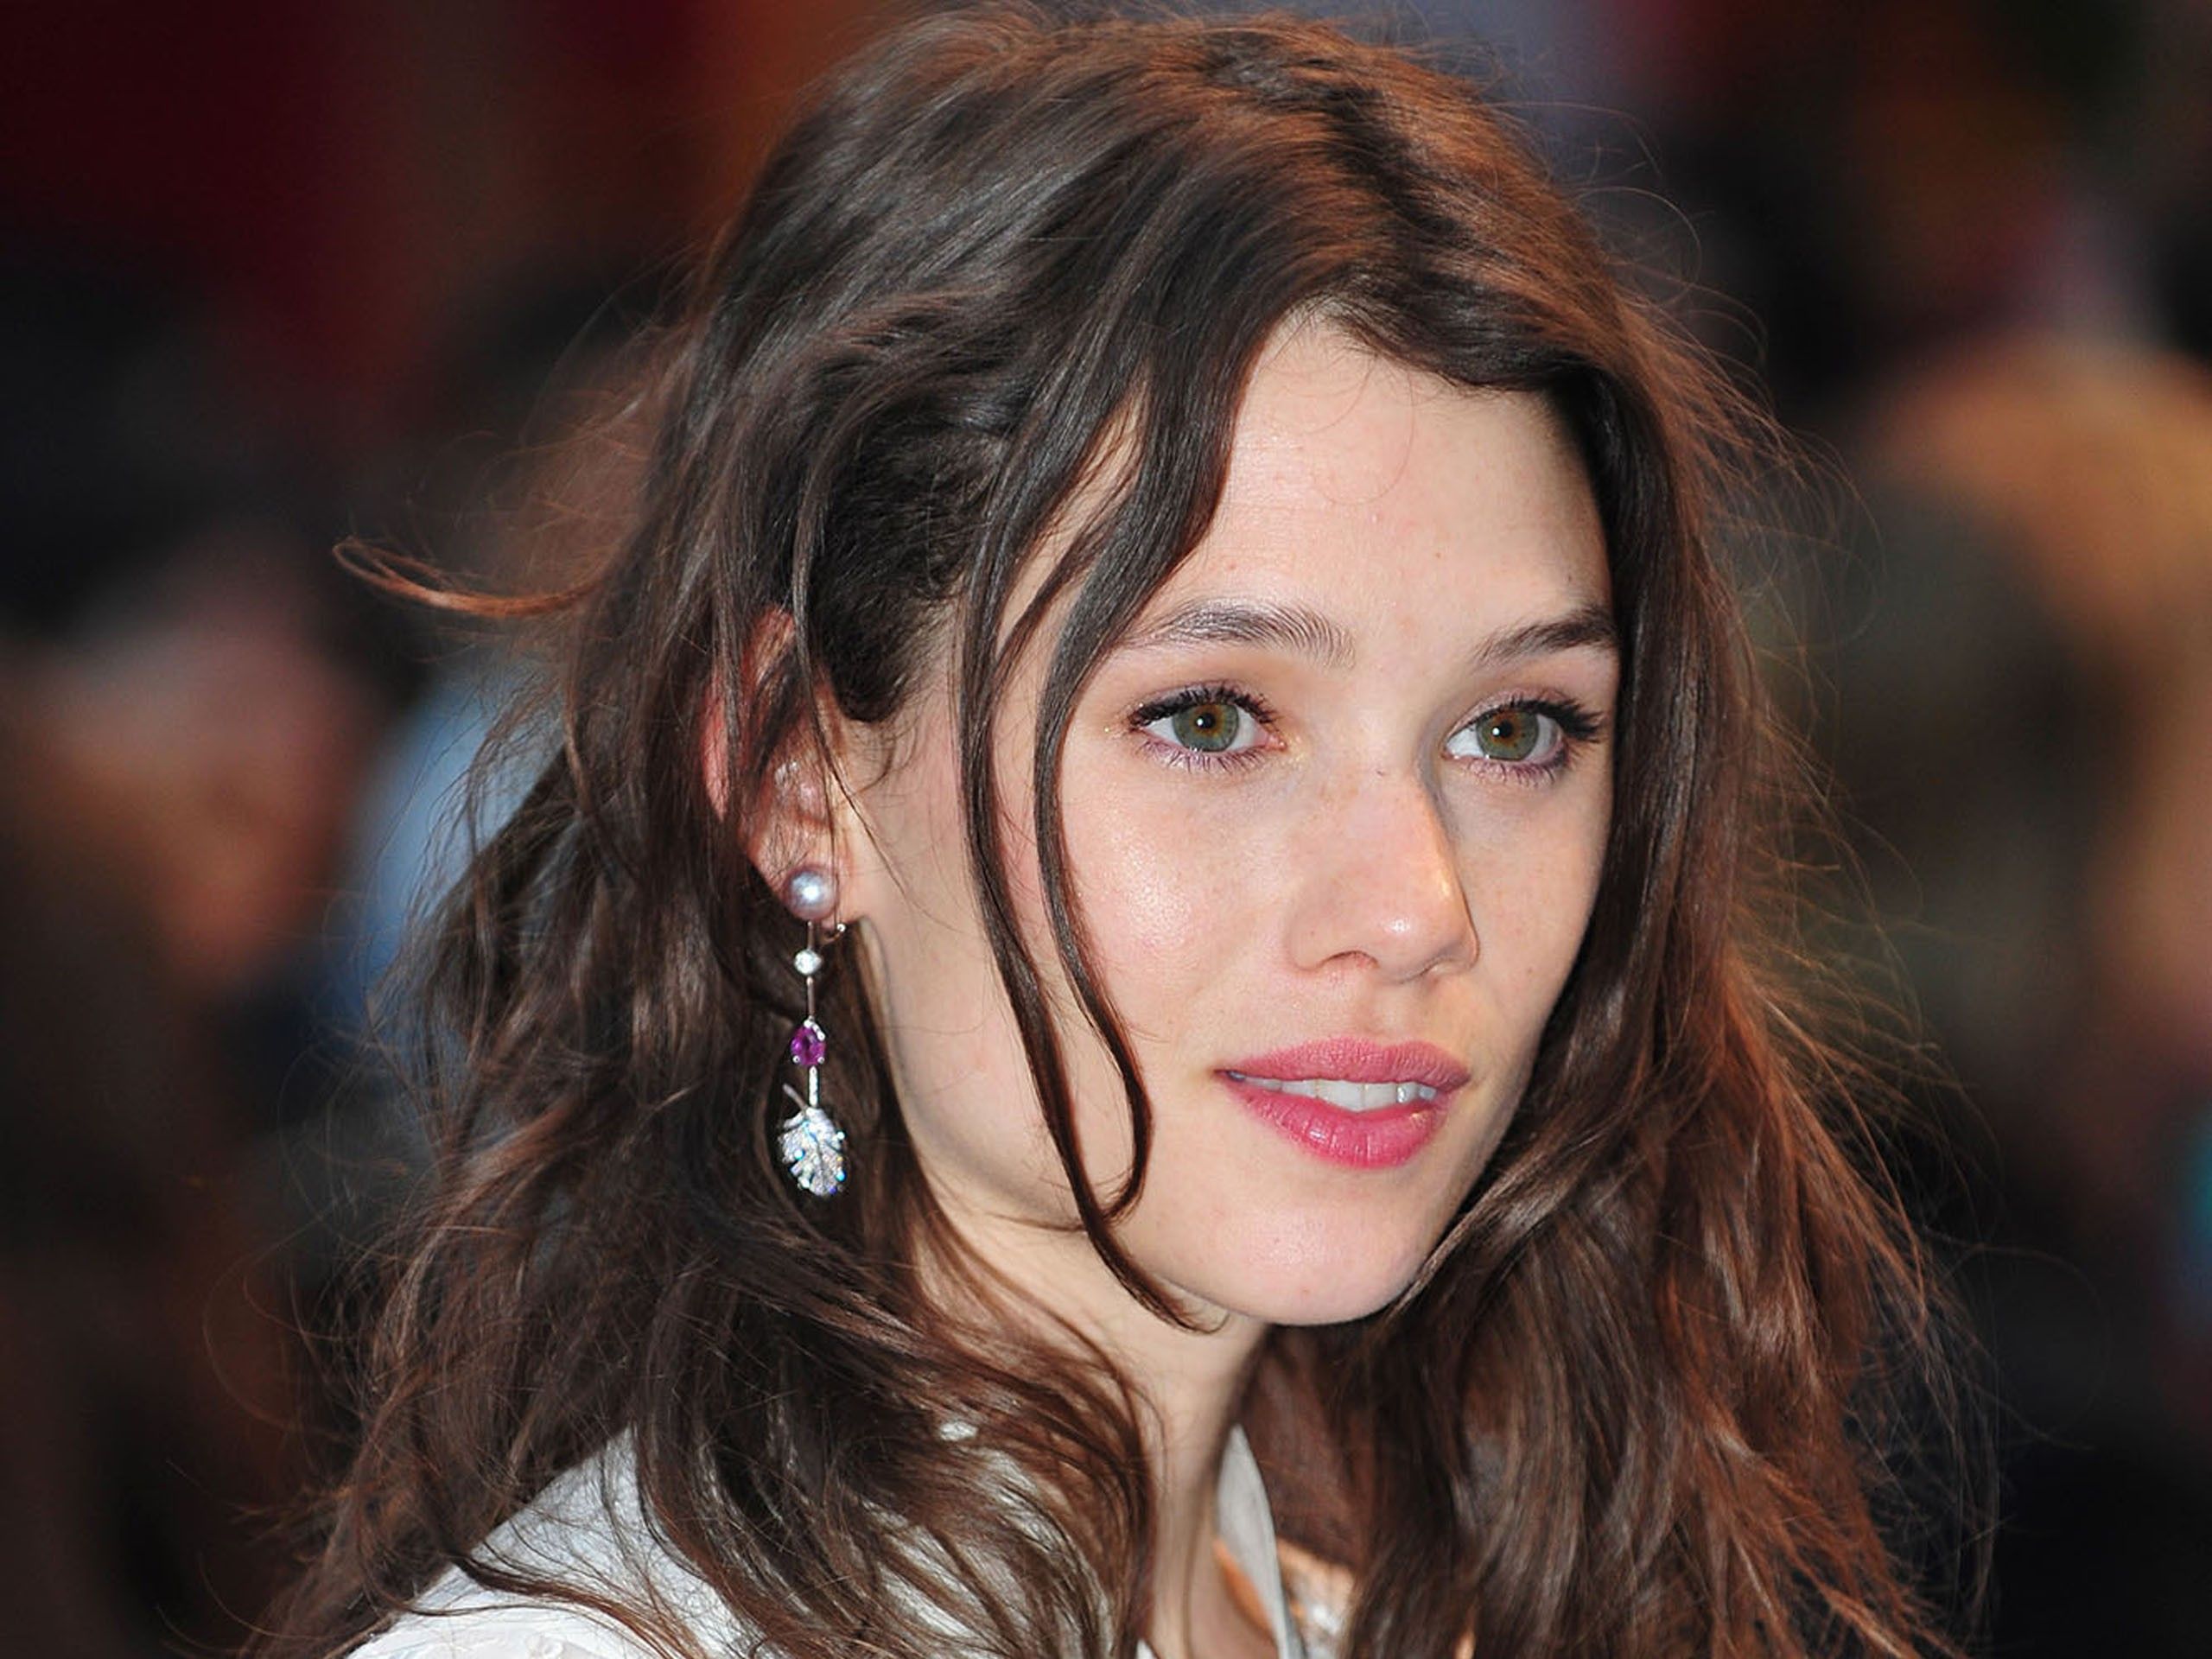 Astrid bergesfrisbey hd wallpapers for desktop download astrid berges frisbey celebrity haircuts sexy hair